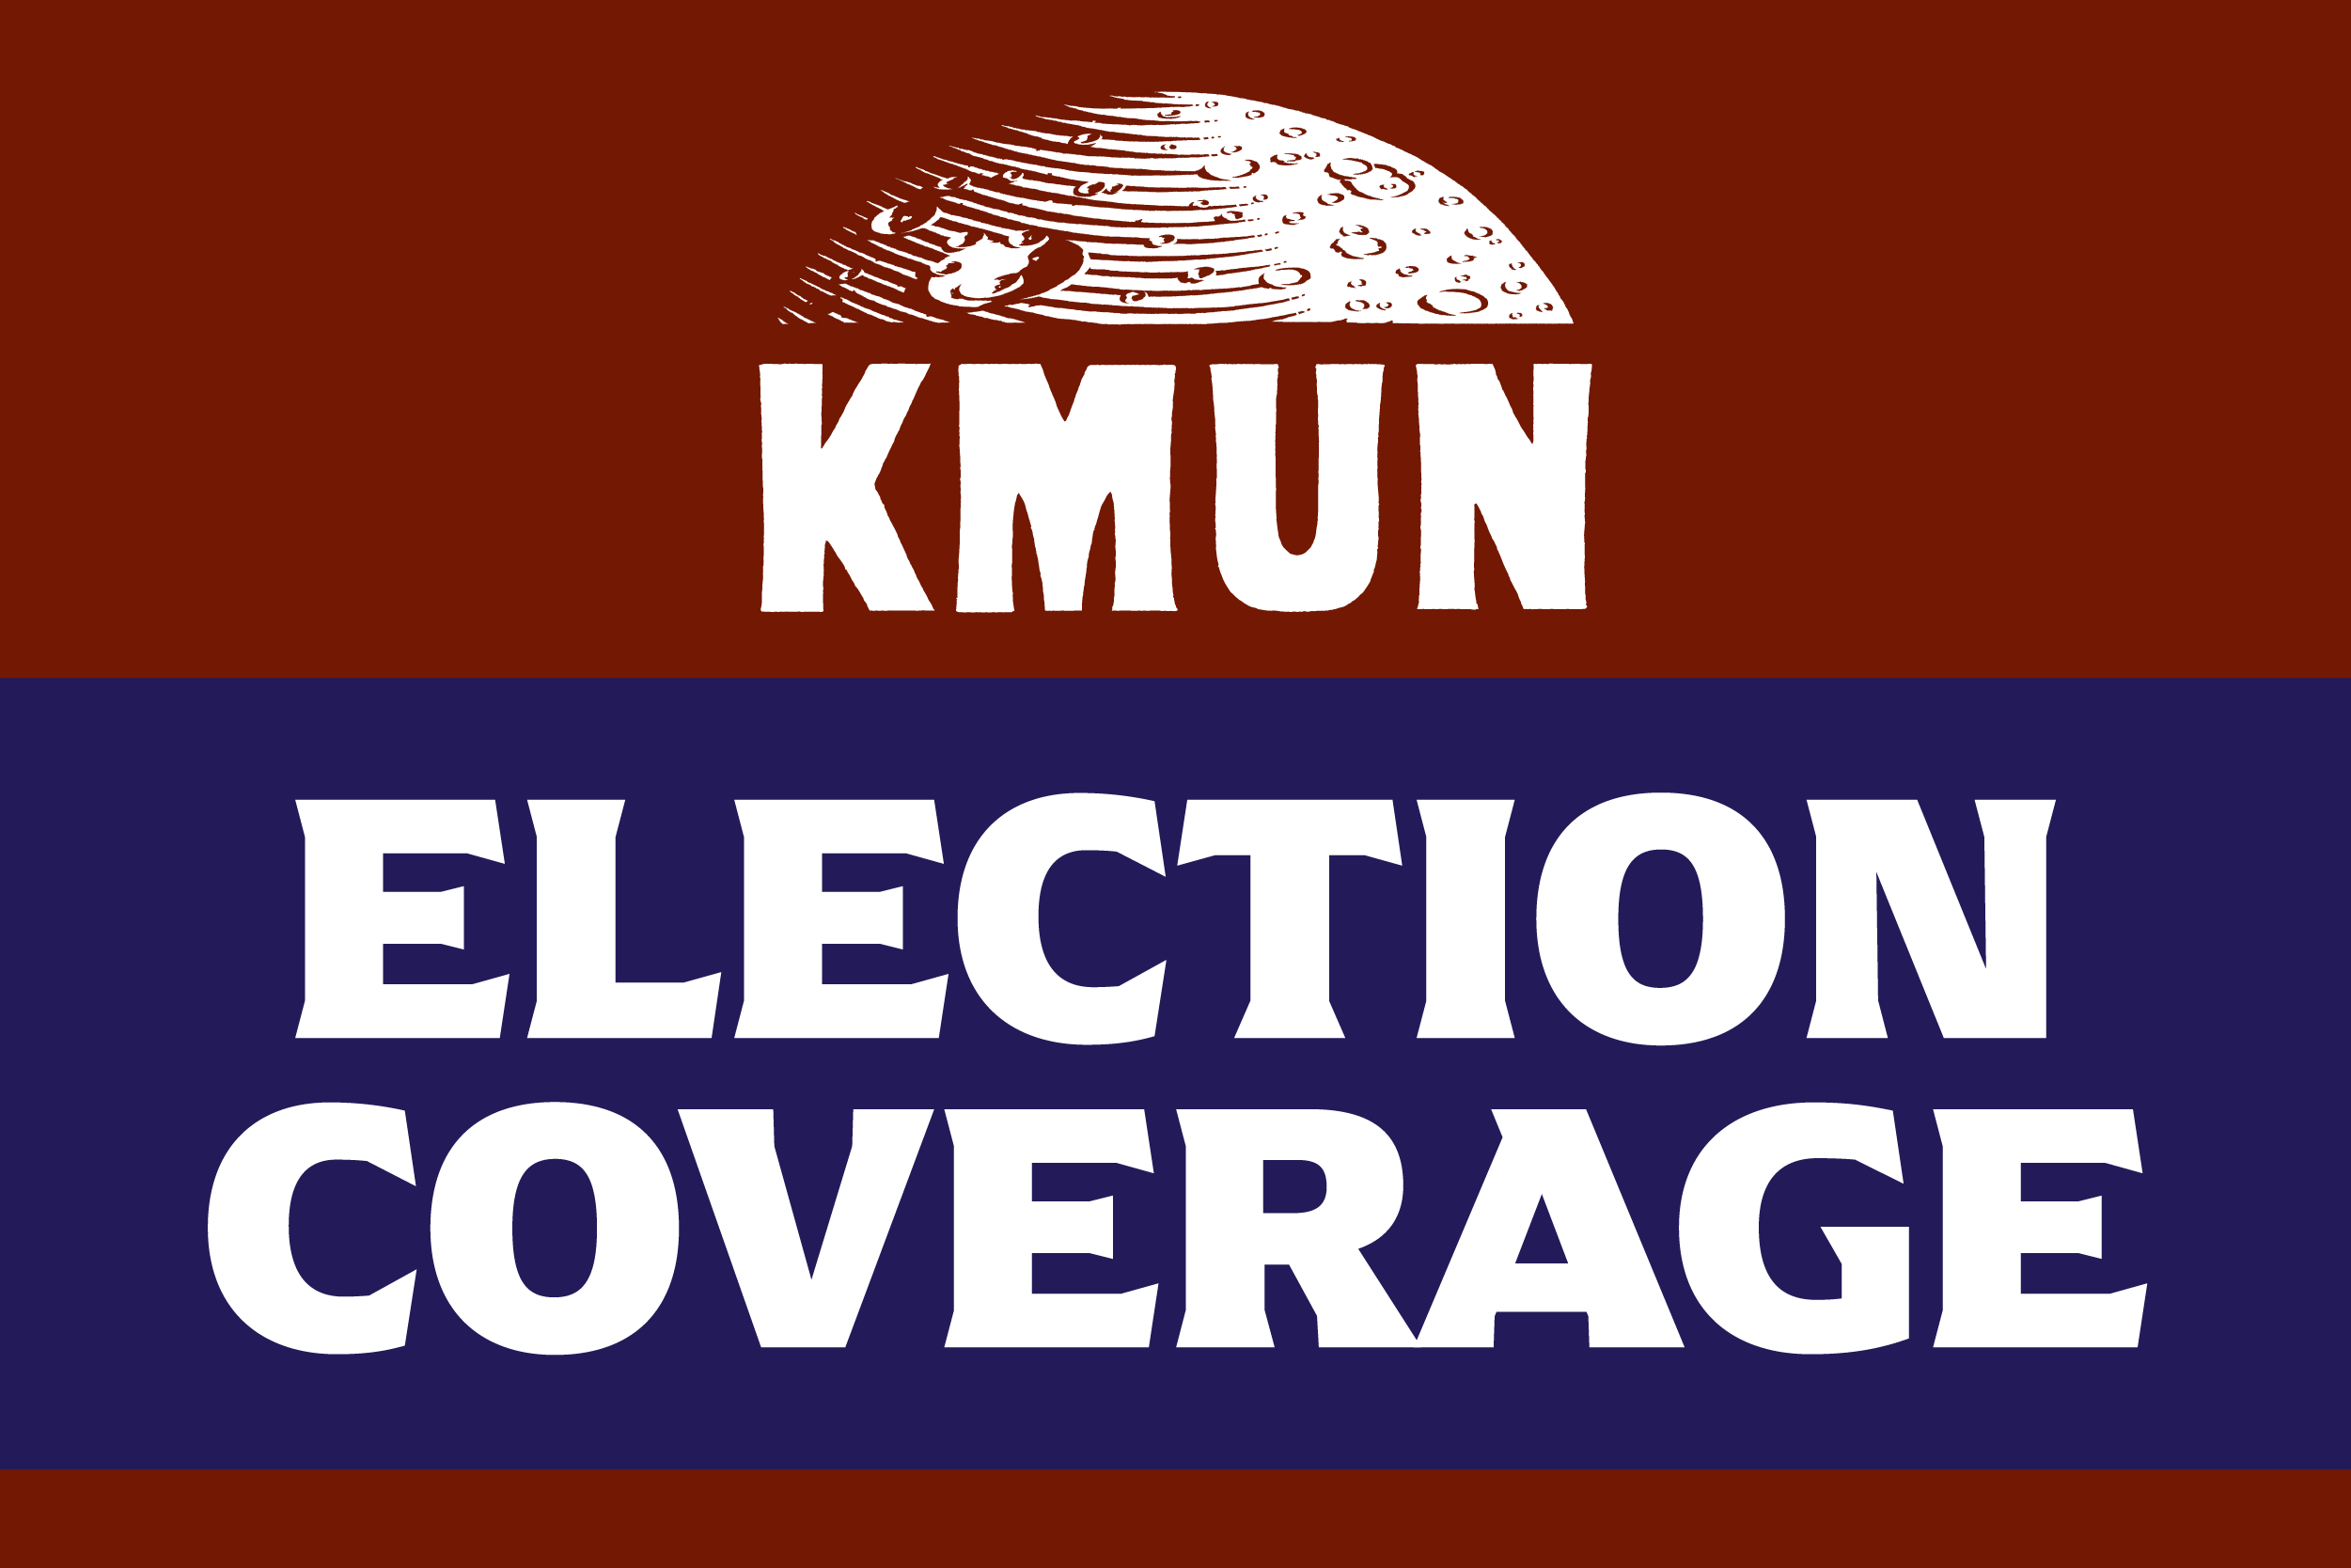 click here for kmun election coverage and regional resources